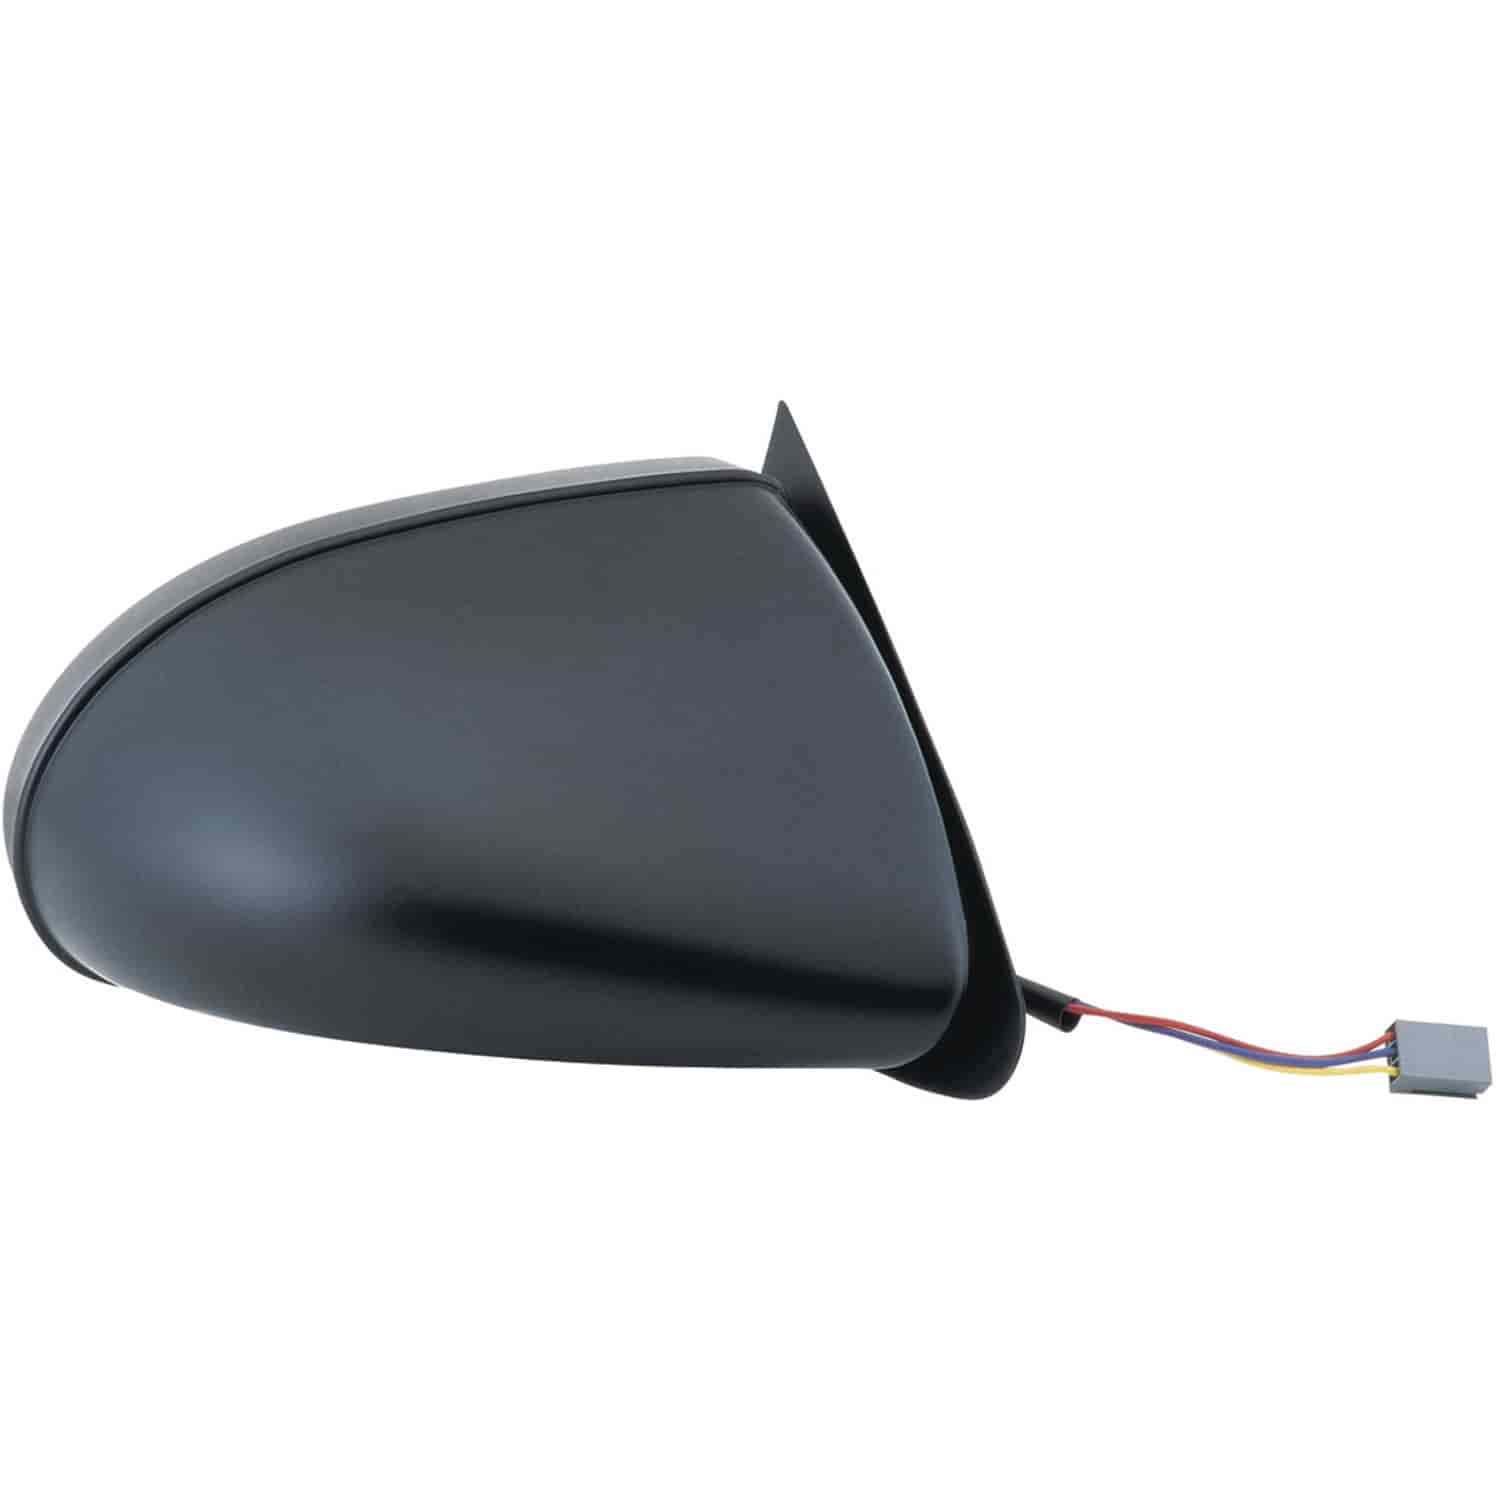 OEM Style Replacement mirror for 89-97 Ford ThunderbirdMercury Cougar passenger side mirror tested t